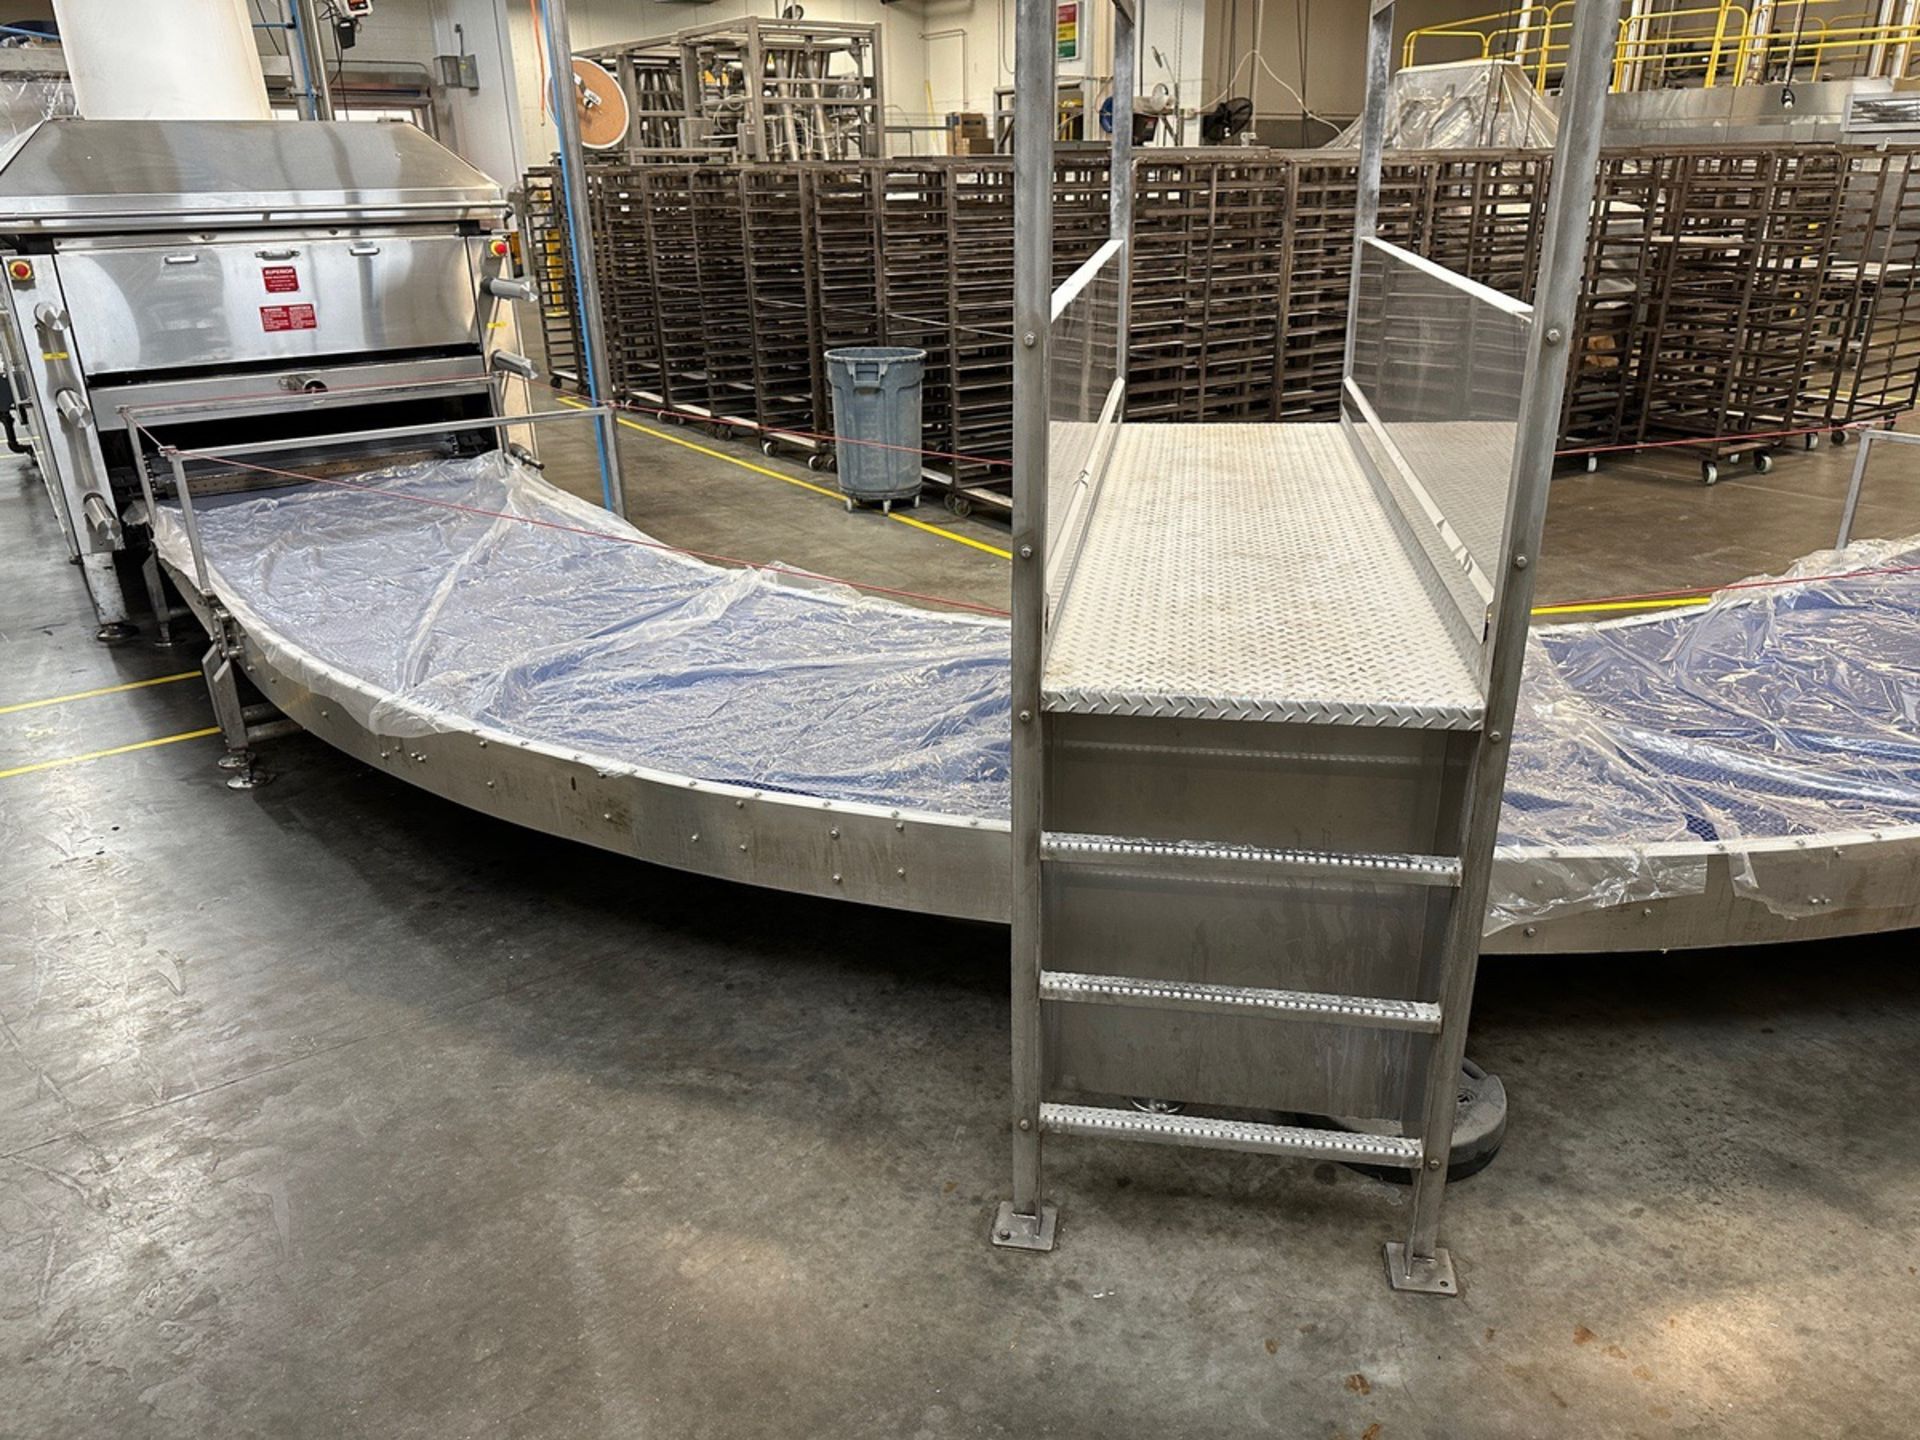 2019 AM Manufacturing Blue Belt Plastic Intralox Conveyor over Stainless Steel Fram | Rig Fee $1500 - Image 3 of 6